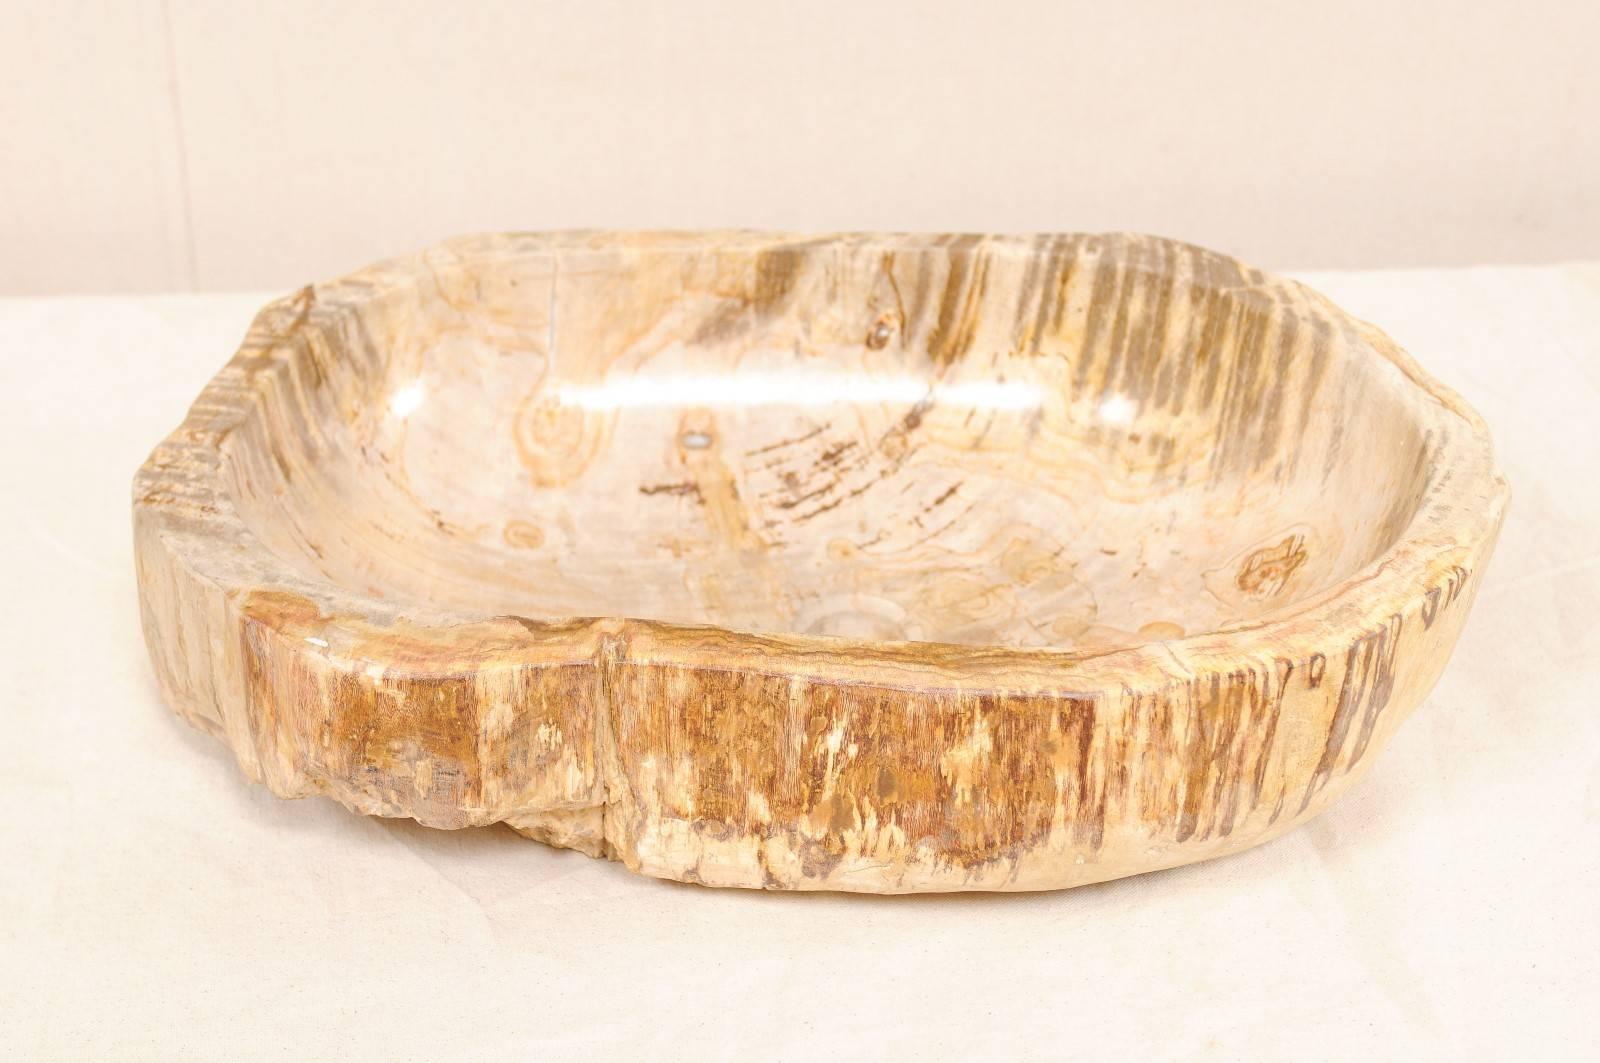 A beautiful petrified wood sink. This petrified wood sink has a mostly oval shape with a flatter back-side. The colors are primarily beige and cream, with warmer brown and rust tones. While the interior of the bowl has been polished, the surround